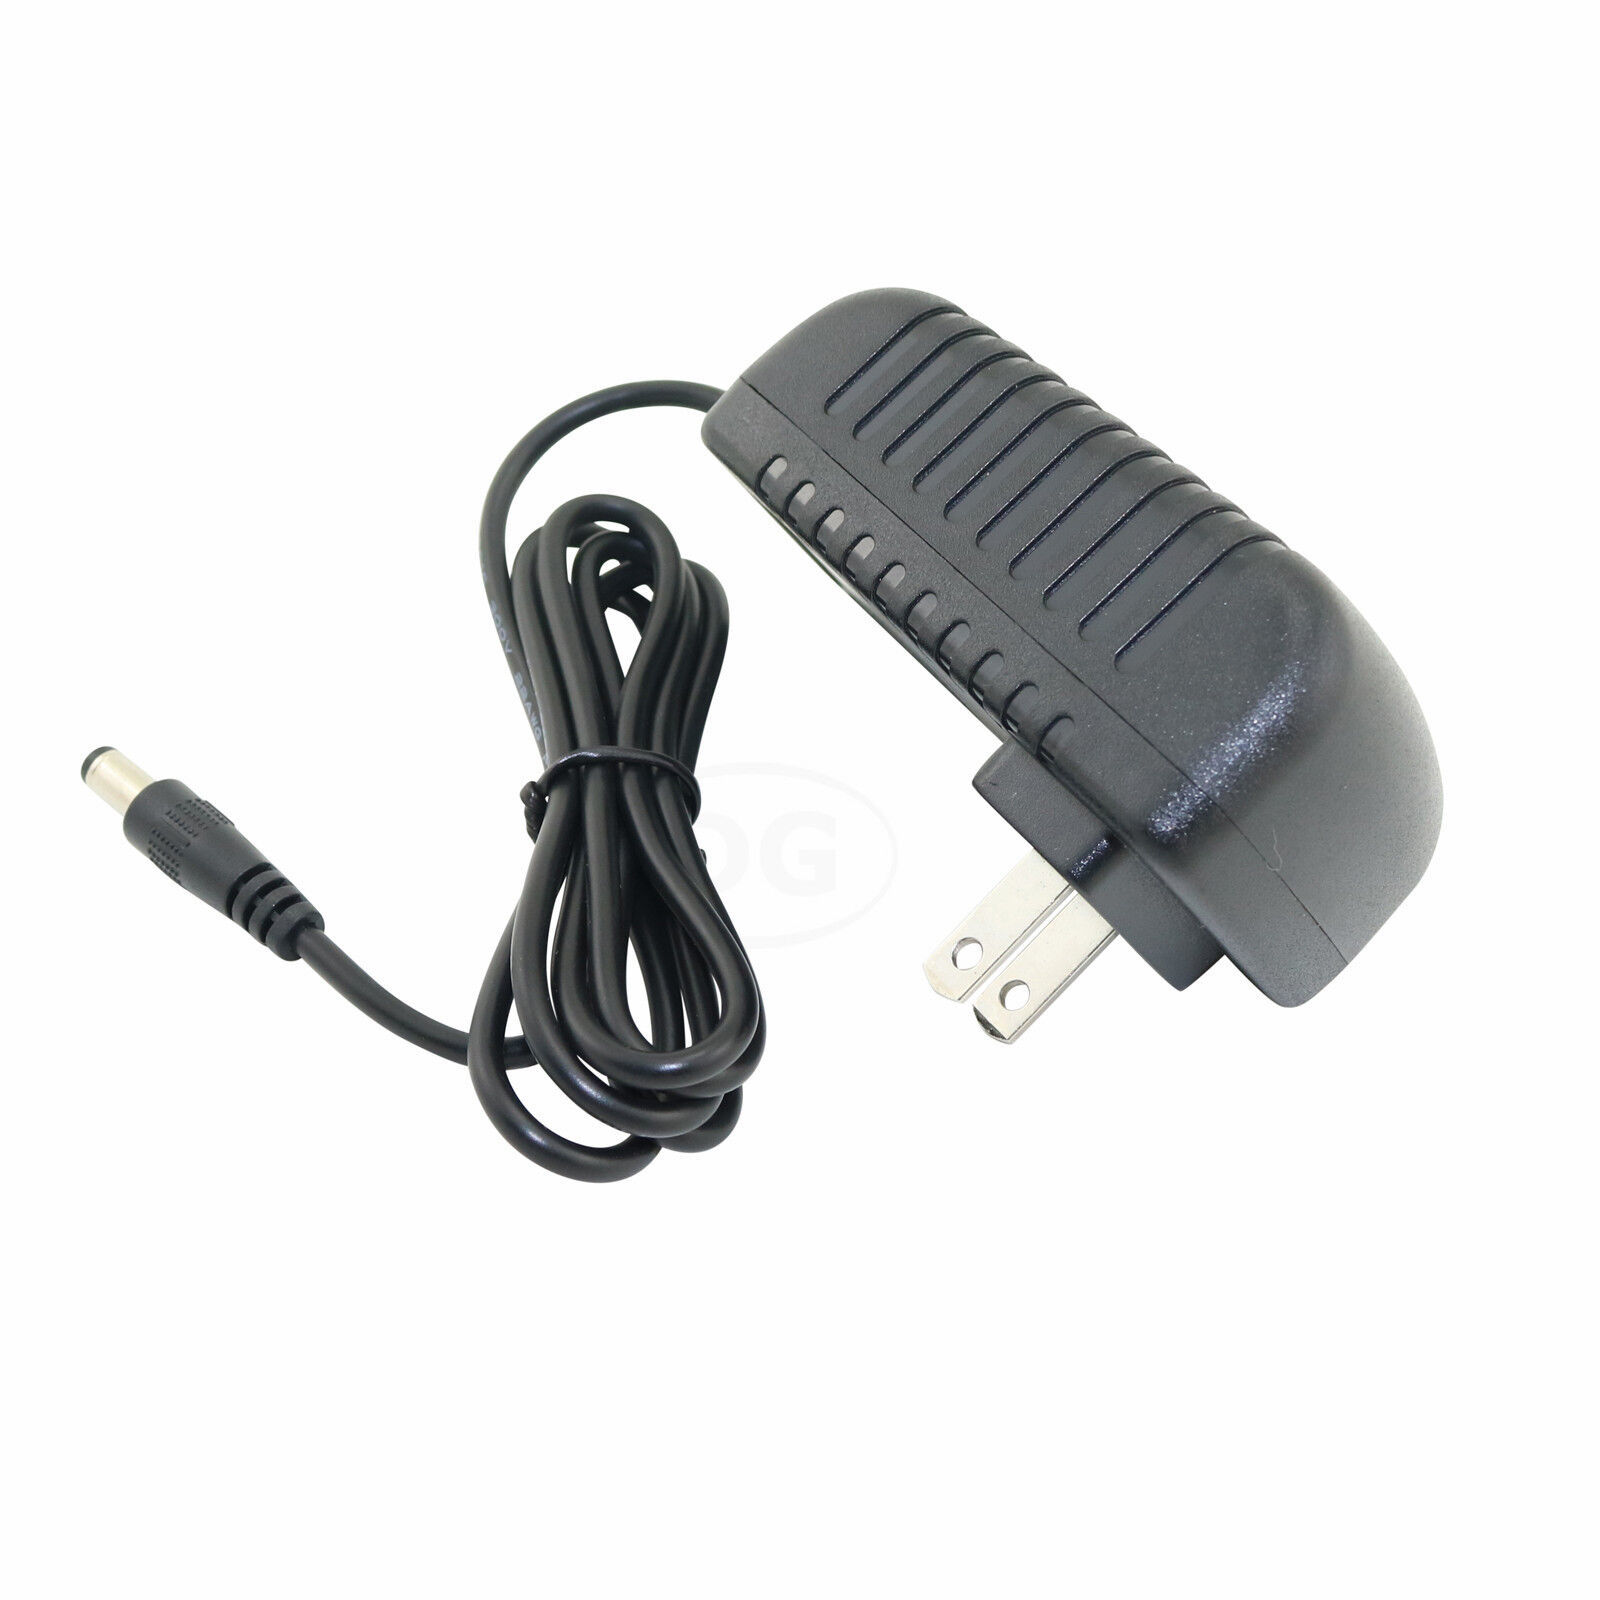 Ac Adapter For Sony Bdp Series Dvd Blu-Ray Disc Player Ac-M1208 Power Supply - $14.45